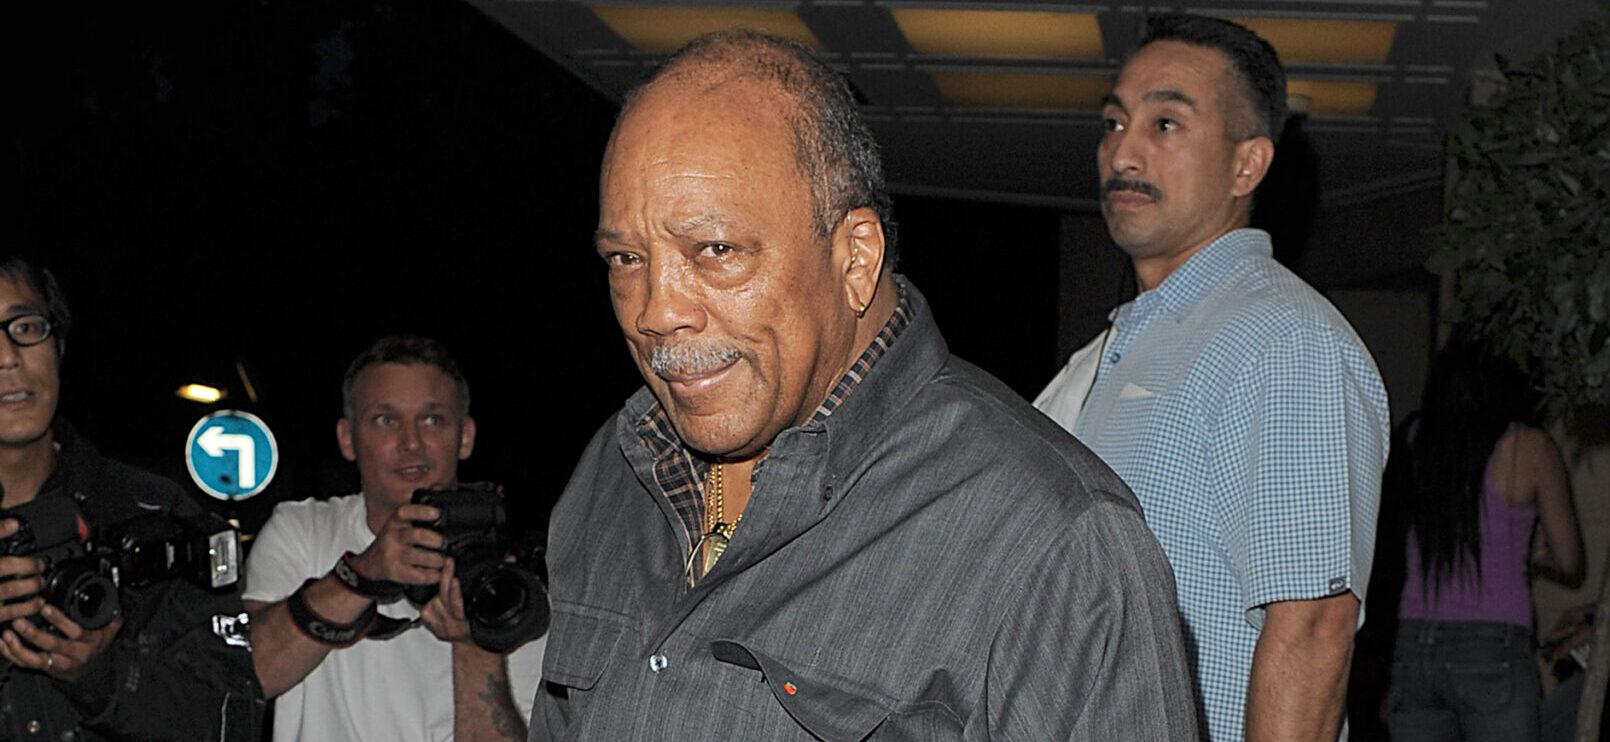 Quincy Jones Reportedly Rushed To The Hospital Due To A 'Bad Reaction' To Food